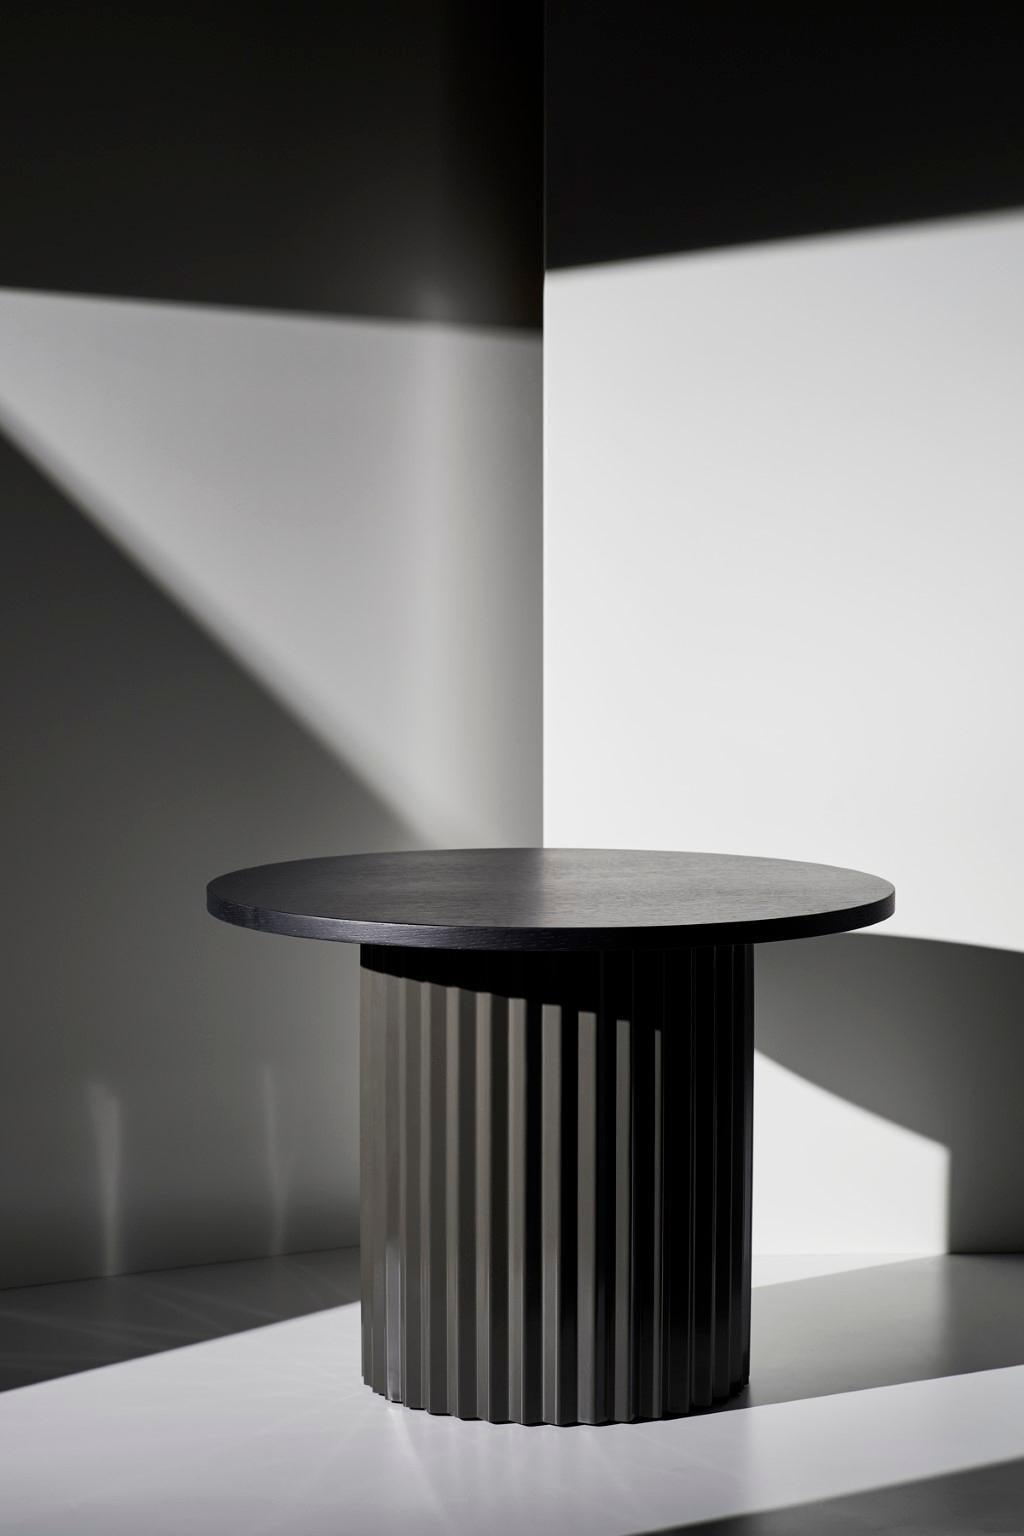 Set of 2 marble tables by Lisette Rützou
Dimensions: 
D 60 x H 41 cm
D 60 x H 41 cm
Materials: column with Marble tabletop


 Lisette Rützou’s design is motivated by an urge to articulate a story. Inspired by the beauty of materials, form and